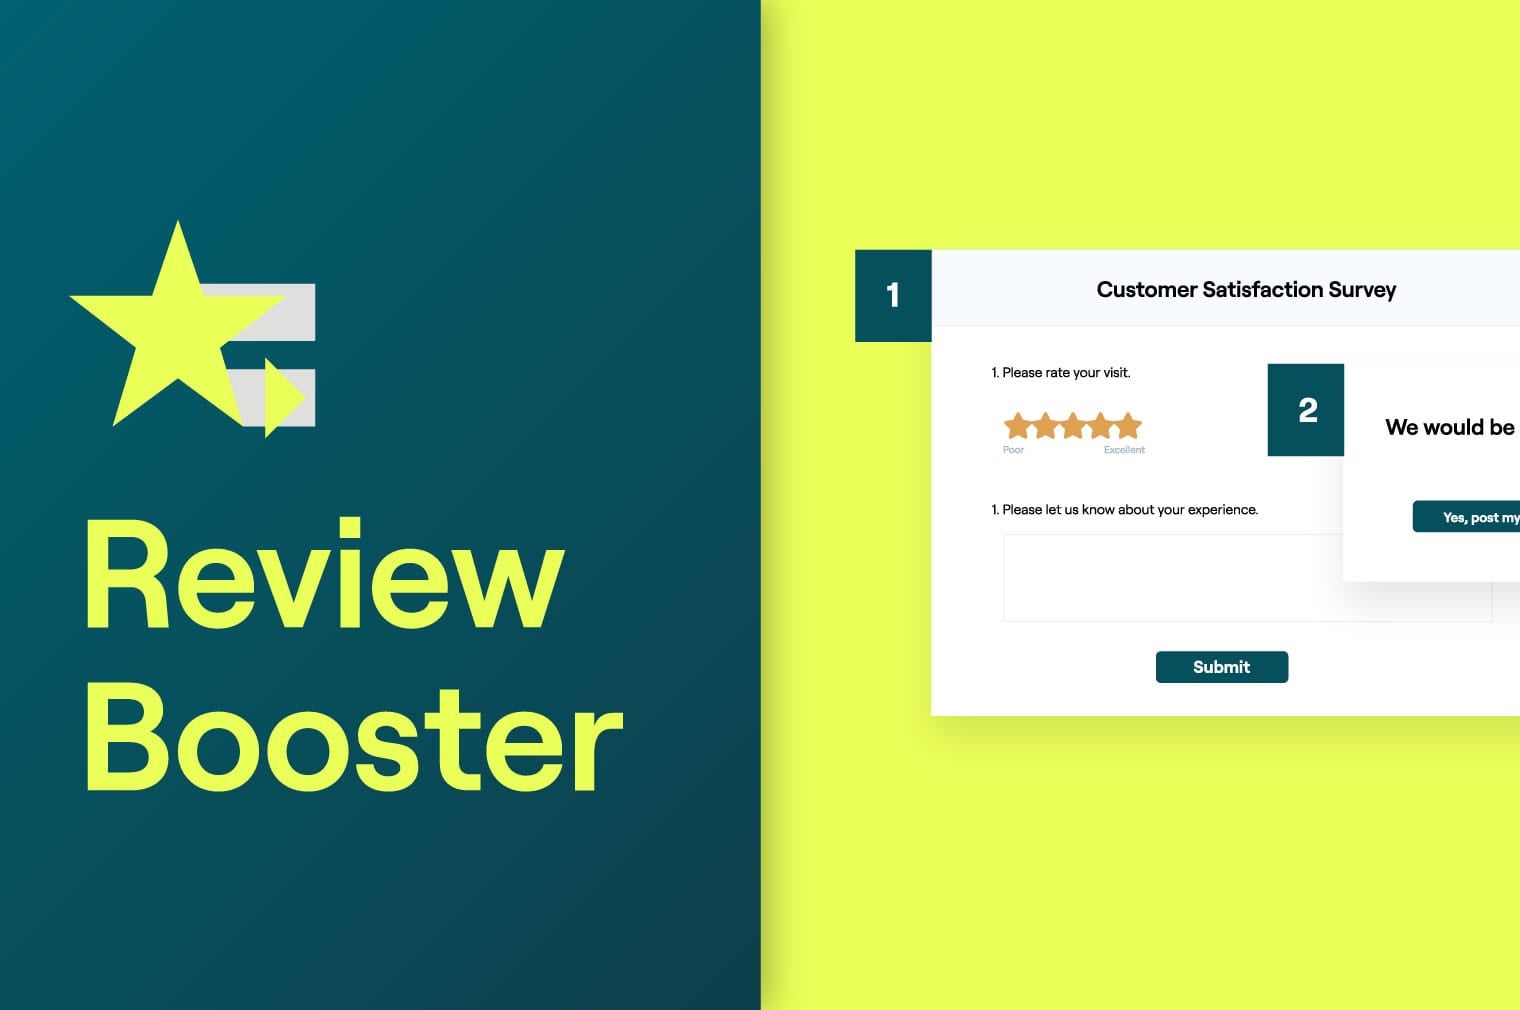 Reviews Booster by Reputation